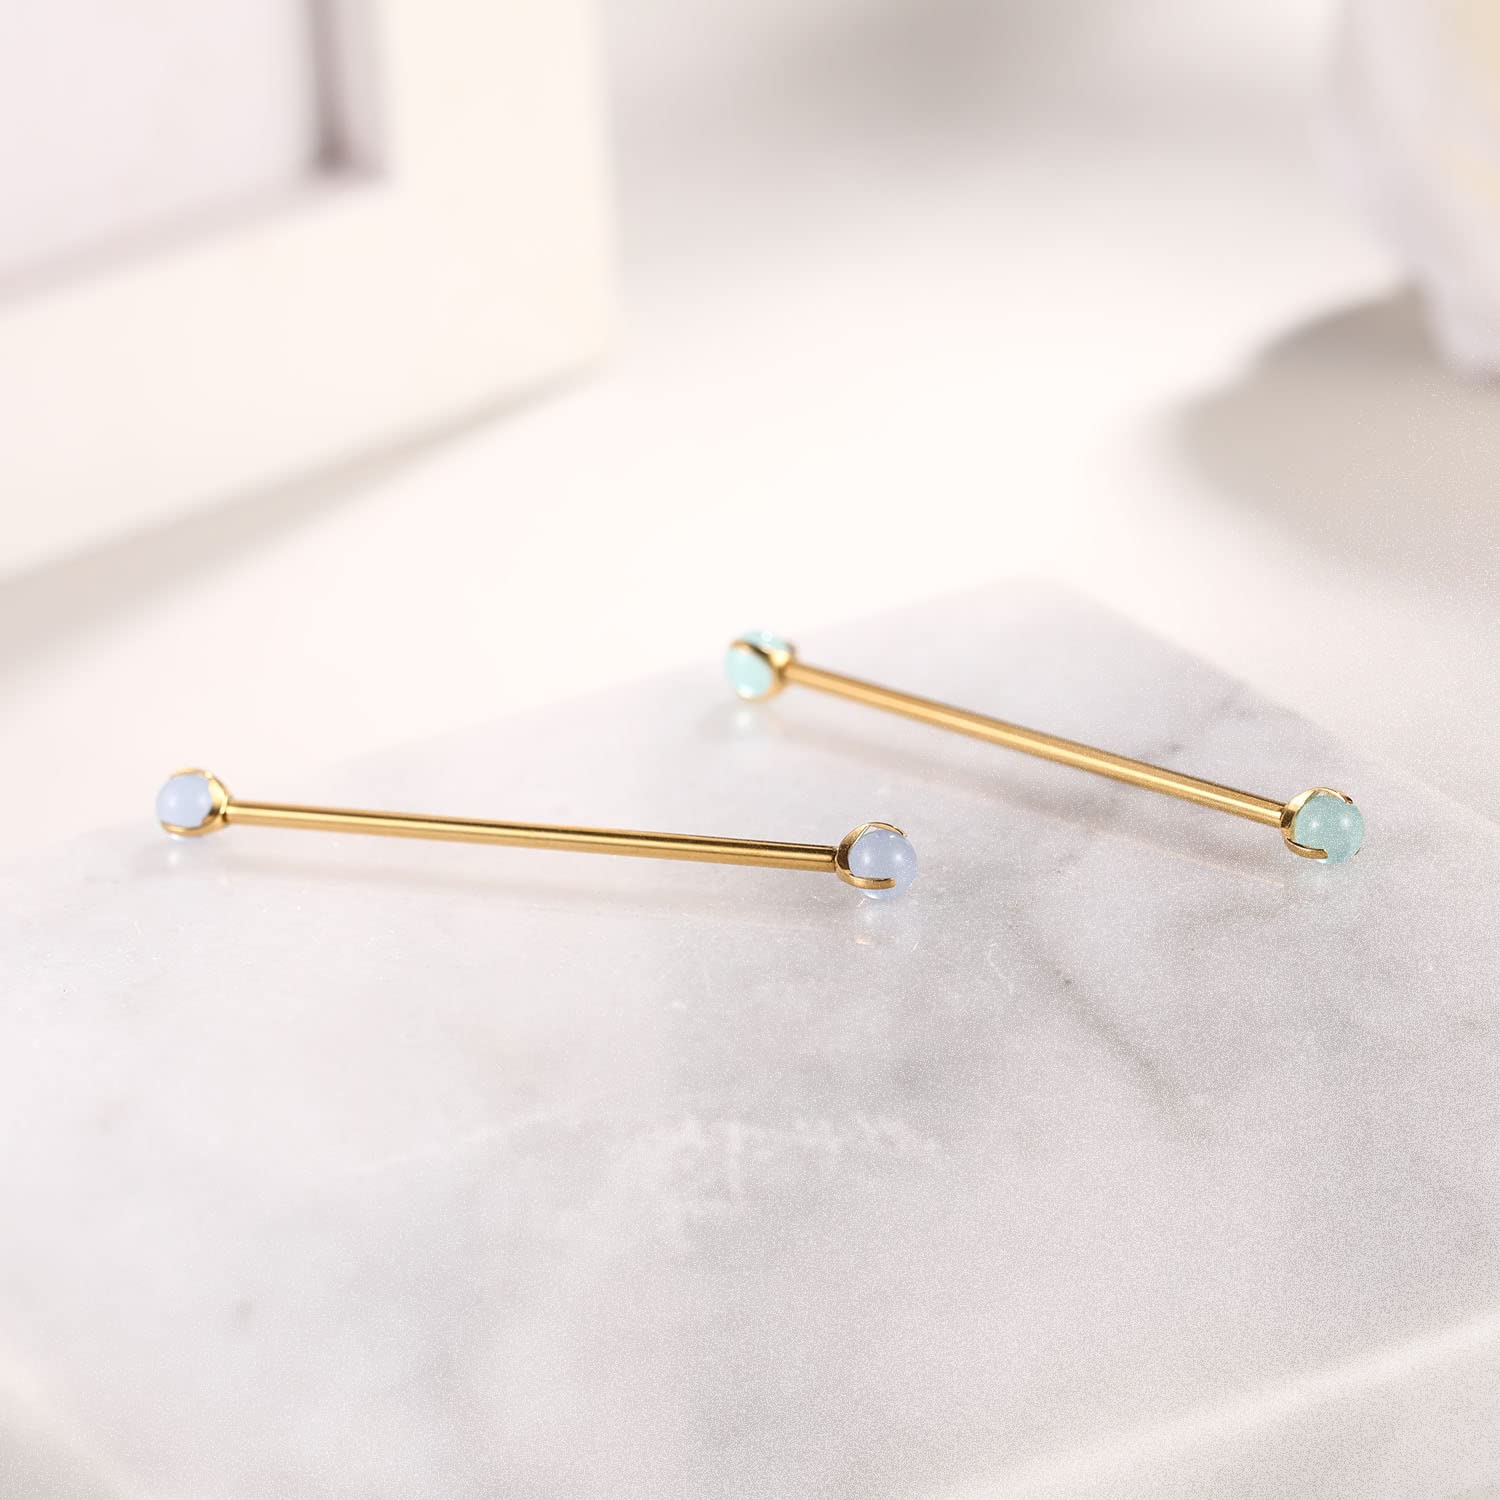 Industrial Bar 14G Industrial Earrings Surgical Steel Industrial Barbell Gold with Green Imitation Jade Industrial Piercing Jewelry Industrial Bar Piercing Body Piercing Jewelry 1 1/2 Inch 38mm